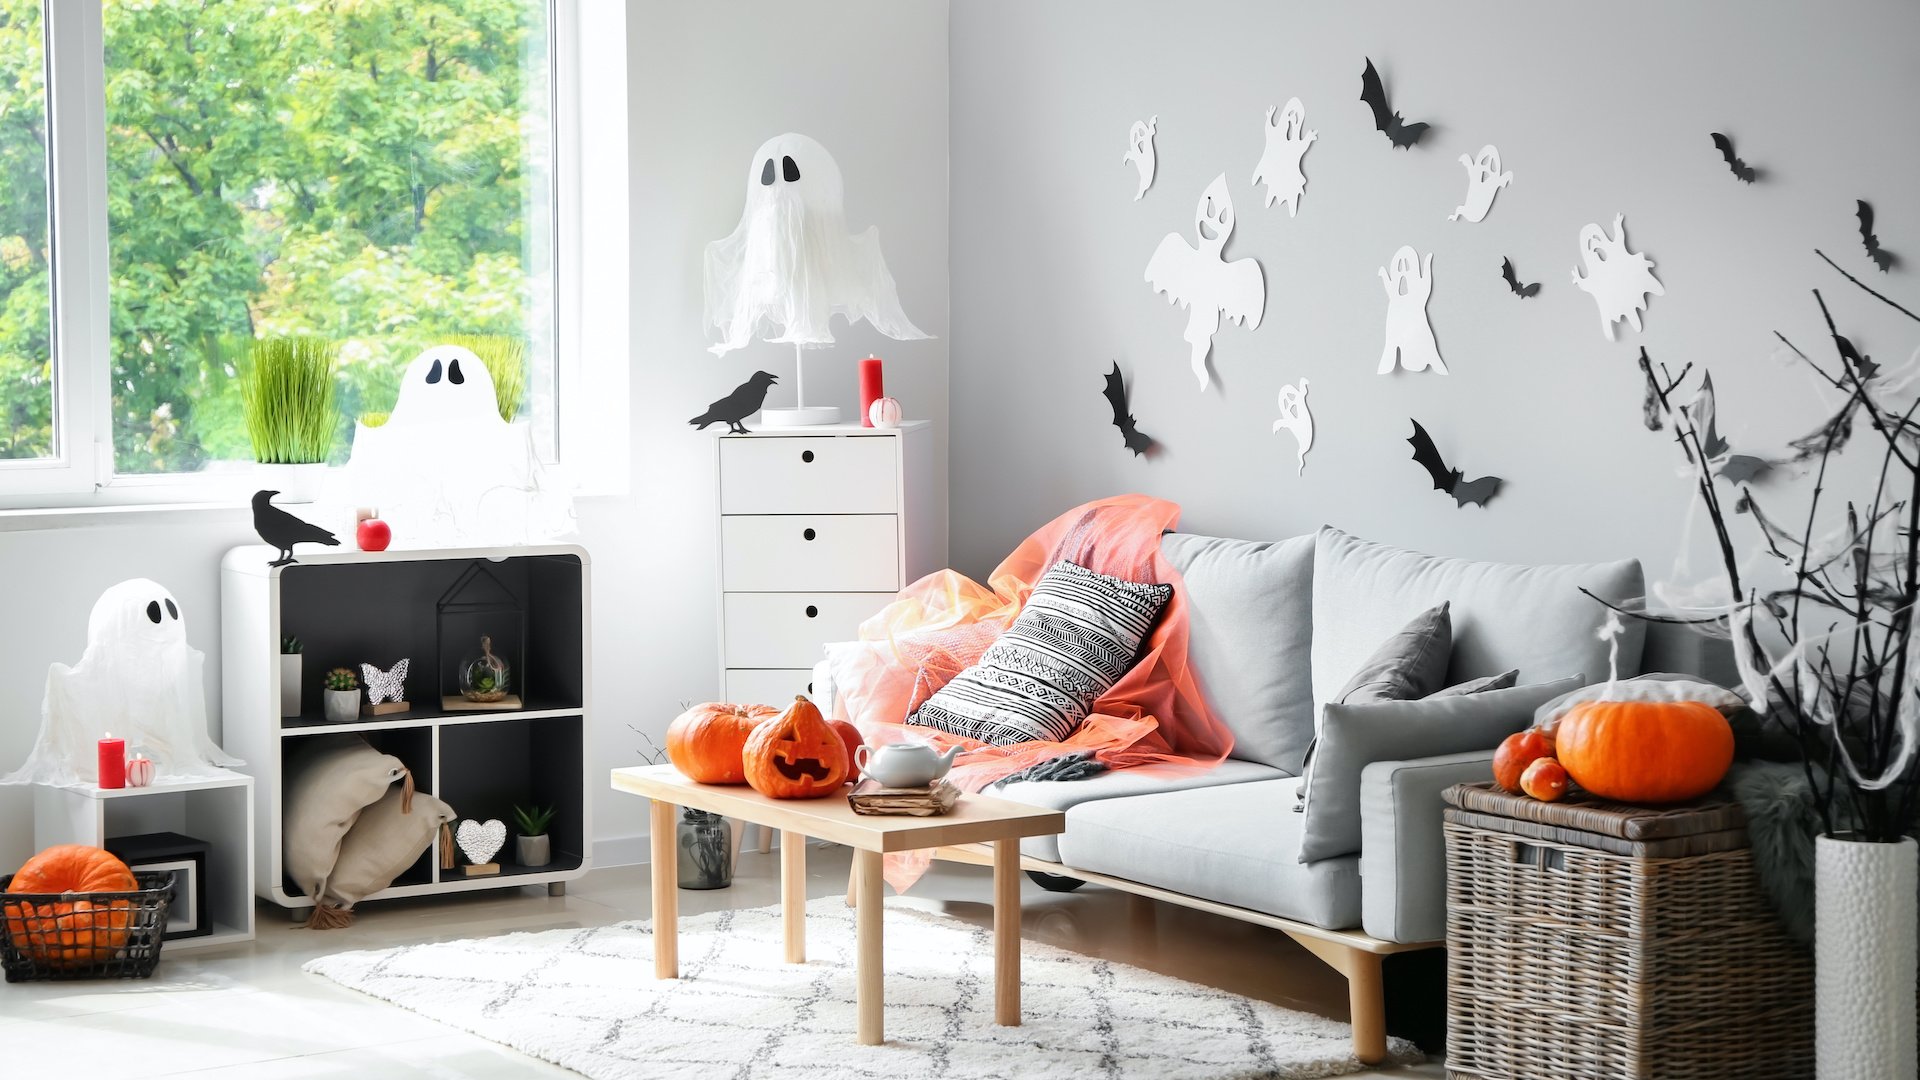 Just Some Boo-tiful Halloween Decor To Get You In The Spooky Spirit